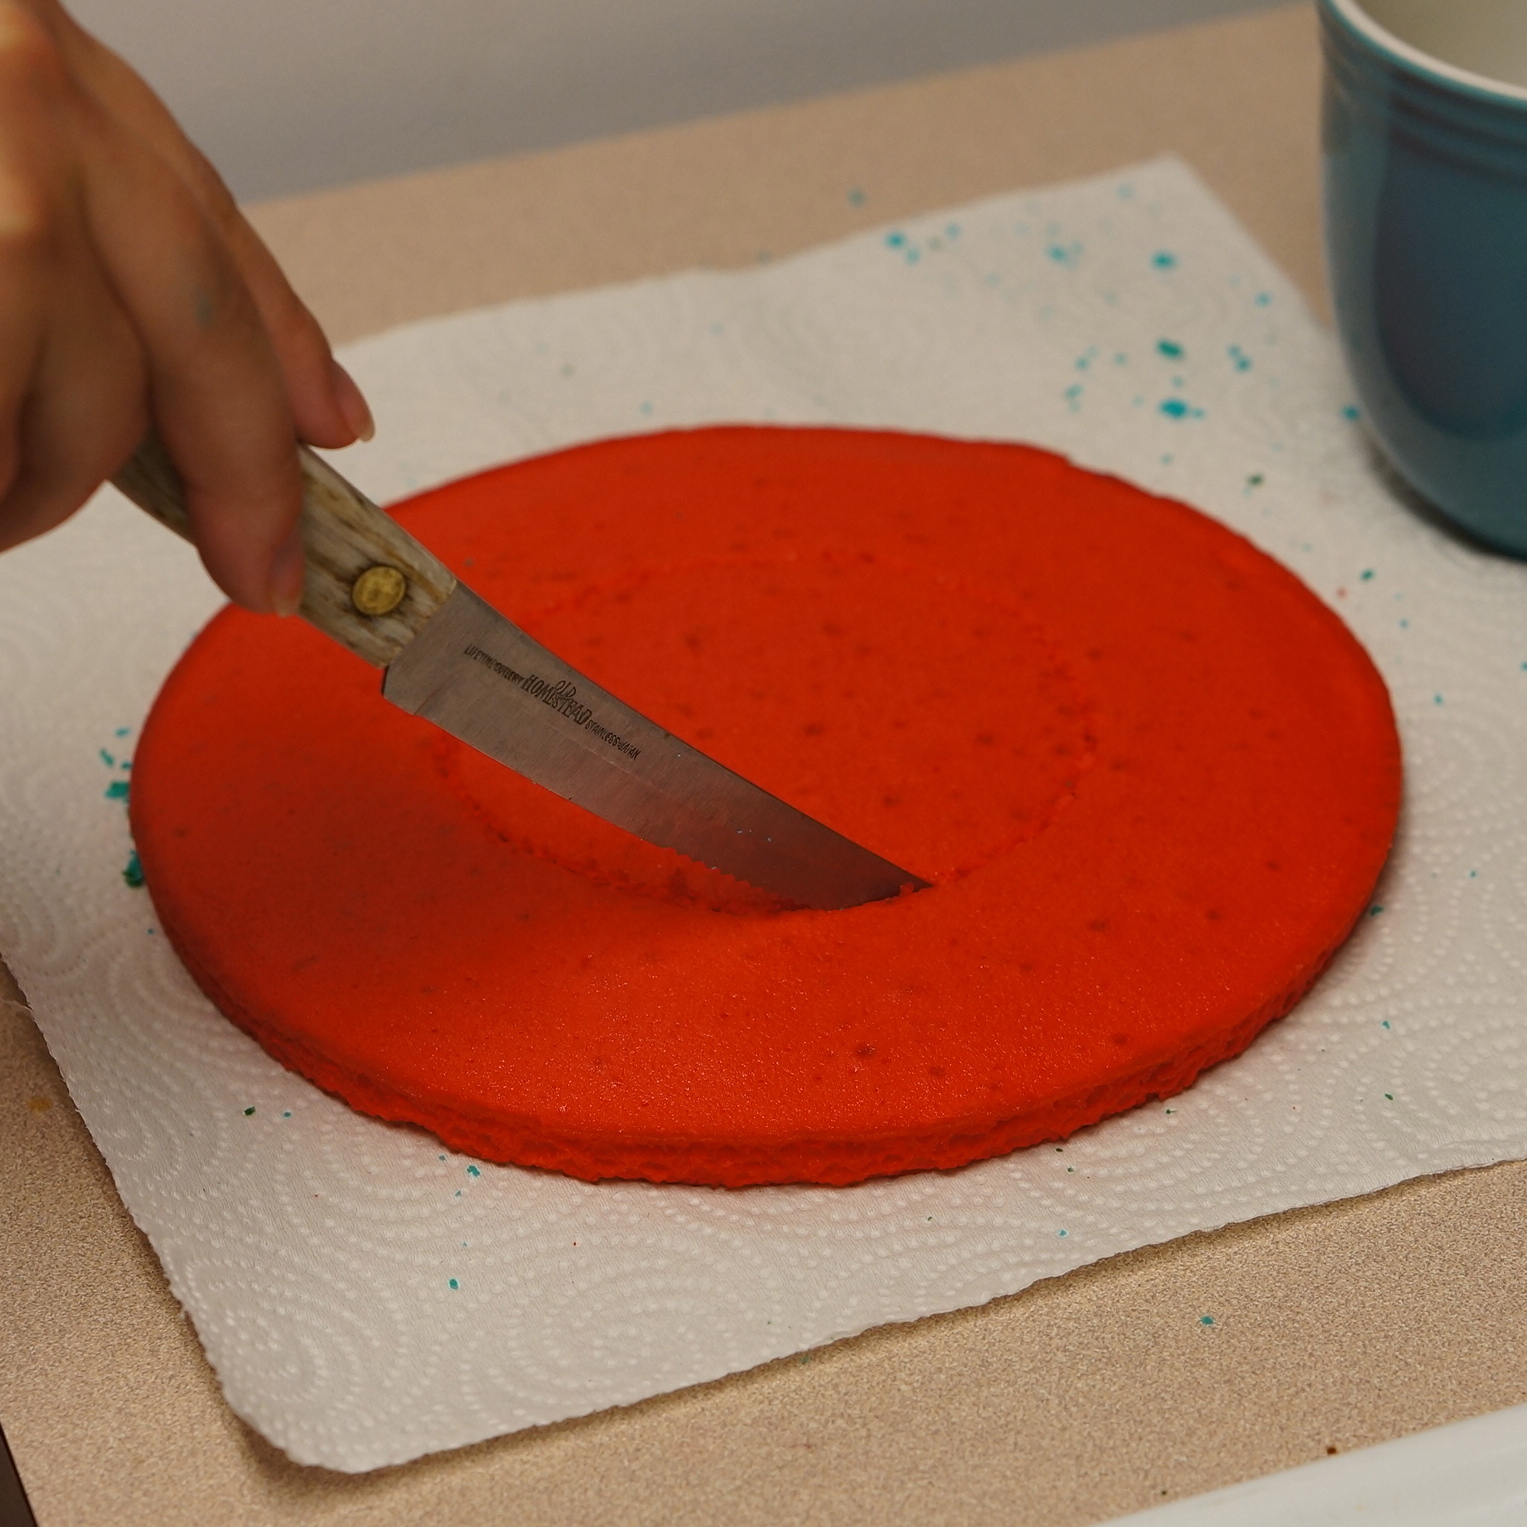 Cut-the-red-cake